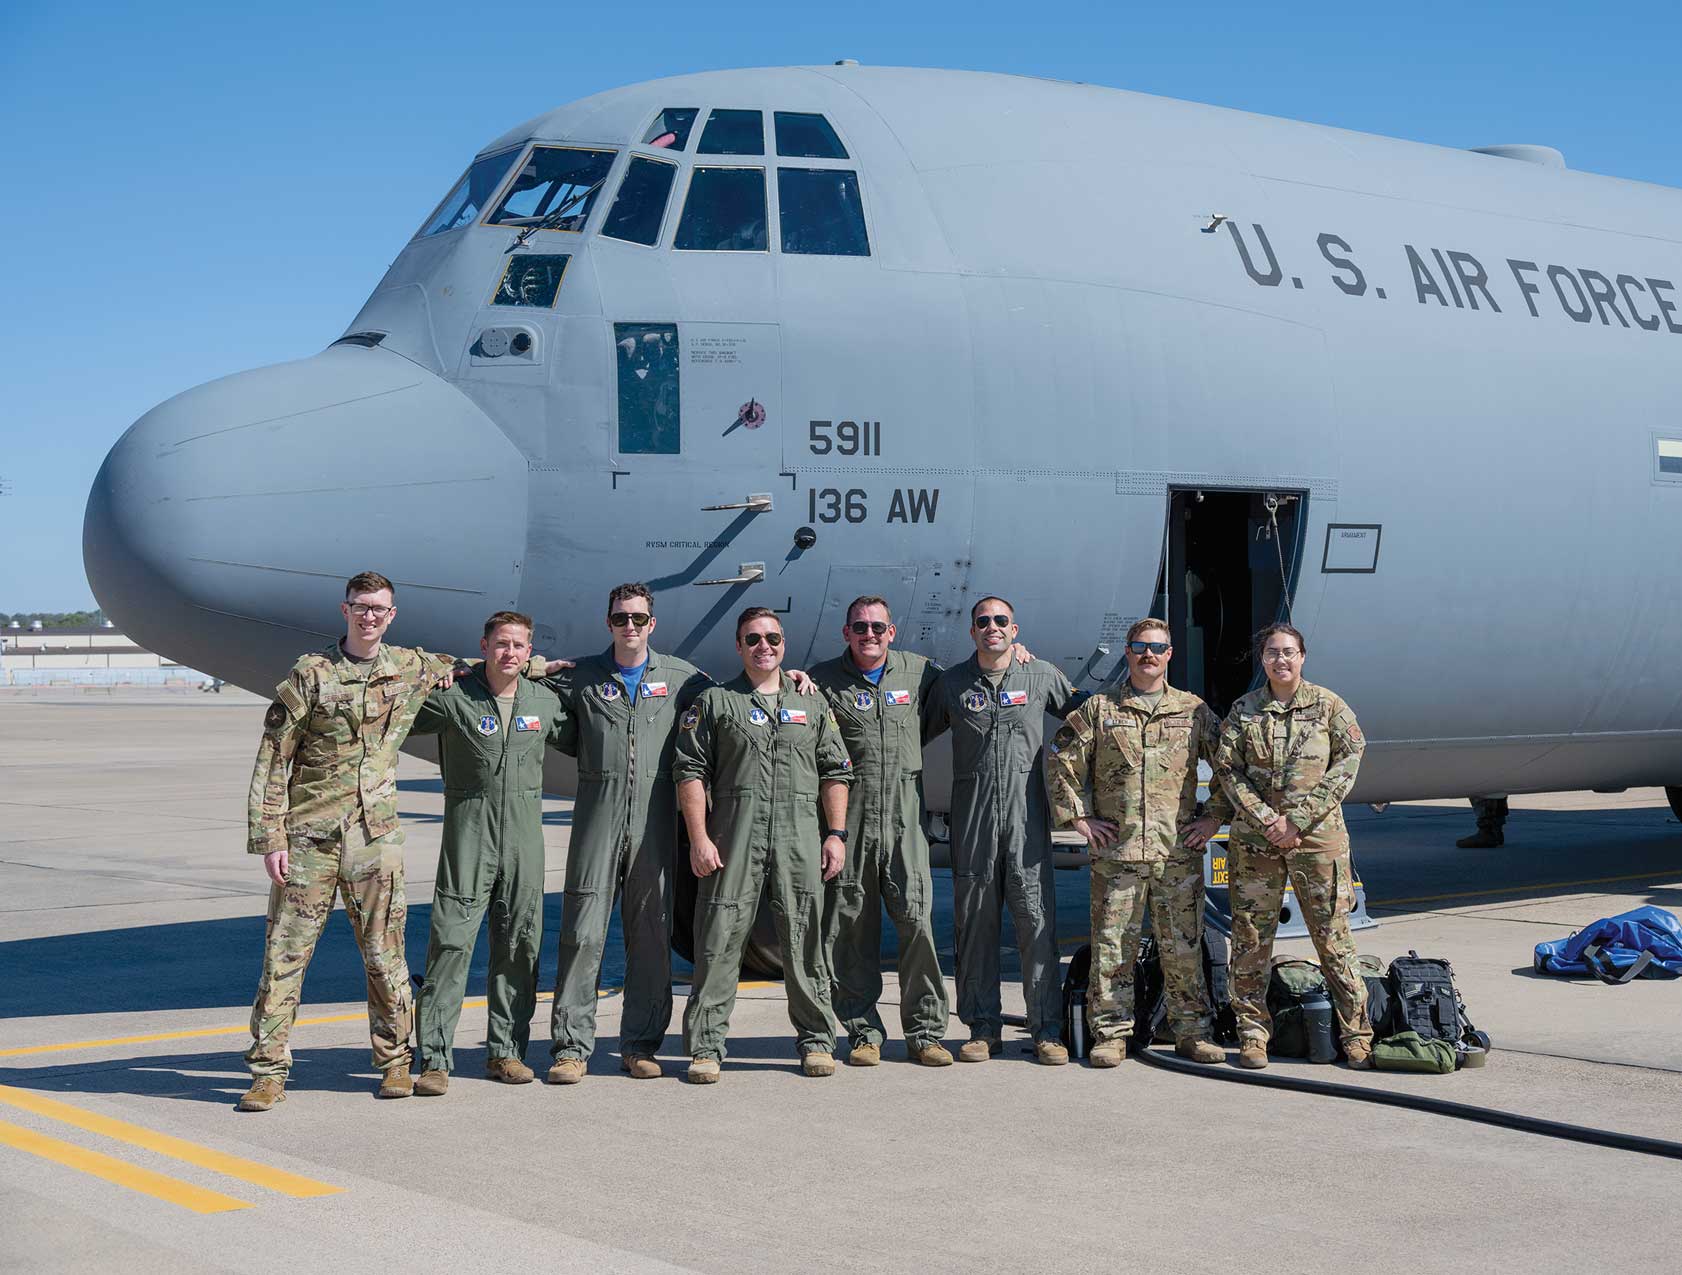 Texas Air National Guardsmen from the 136th Airlift Wing celebrate completion of 200,000 Class A mishap-free flying hours, Oct. 21, 2022, at Naval Air Station Joint Reserve Base, Fort Worth, TX. USANG photo by SSgt Laura Weaver